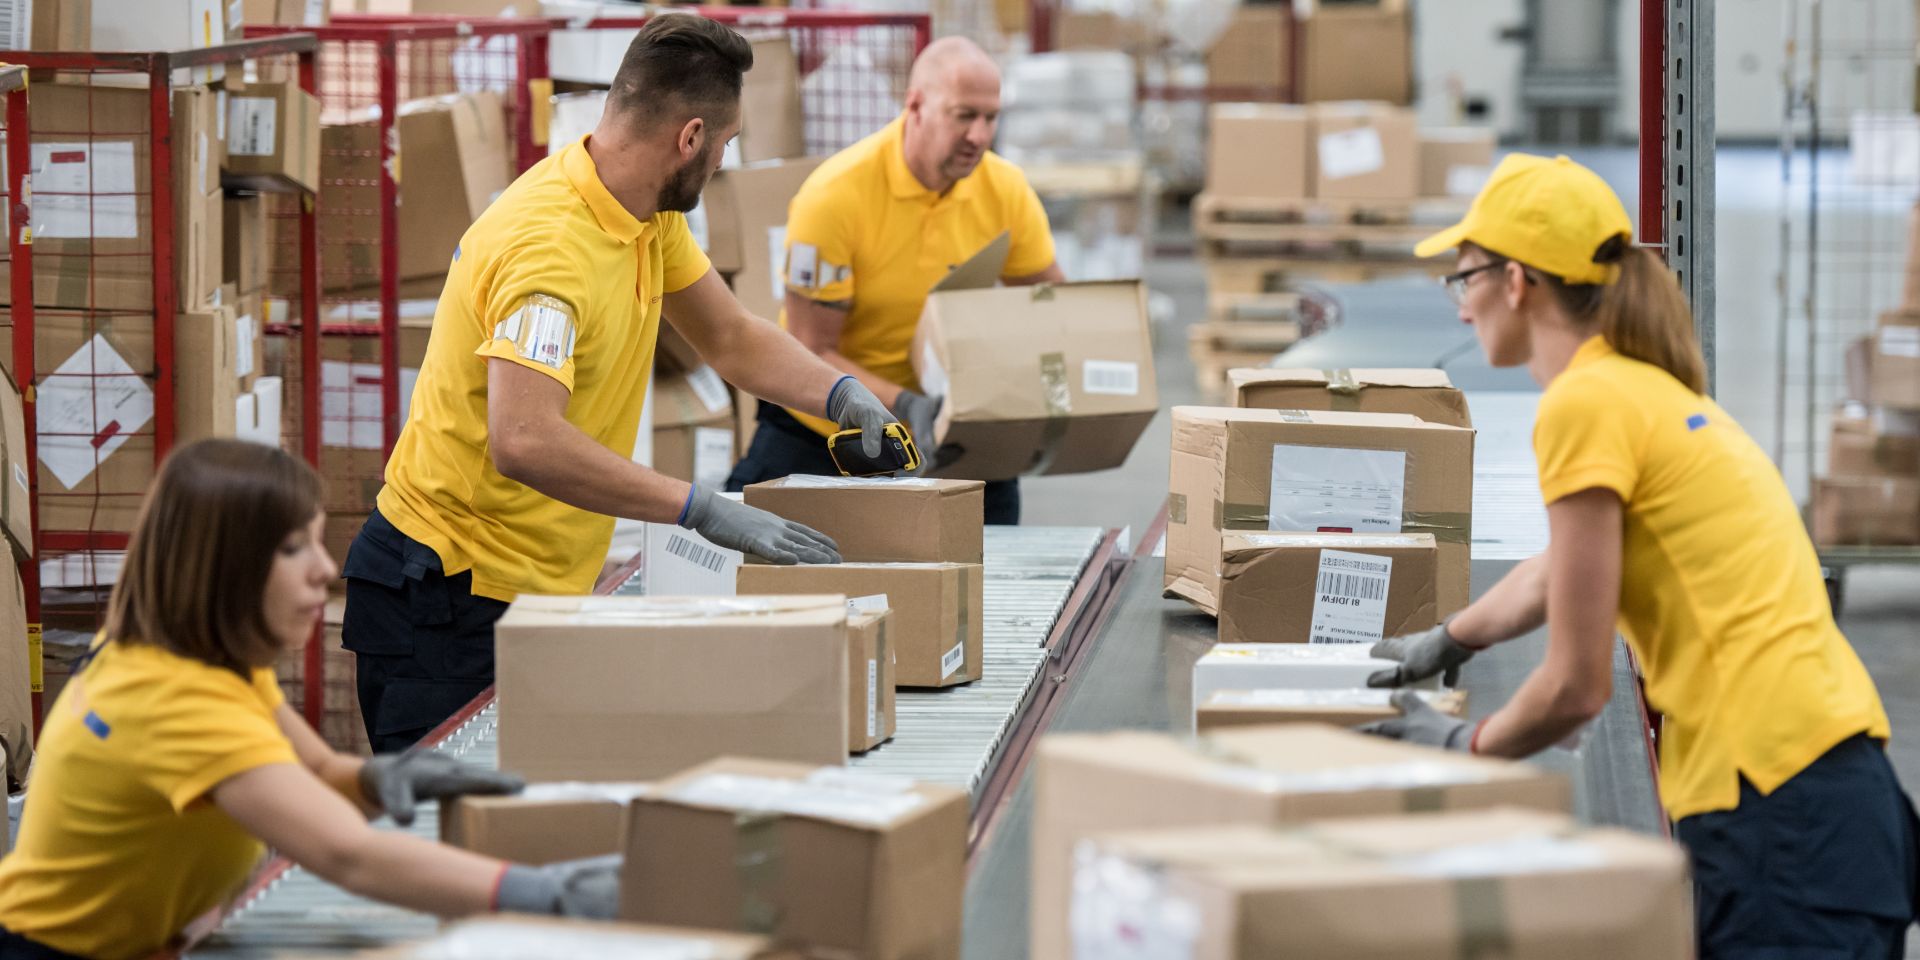 Four people sorting packages in a warehouse